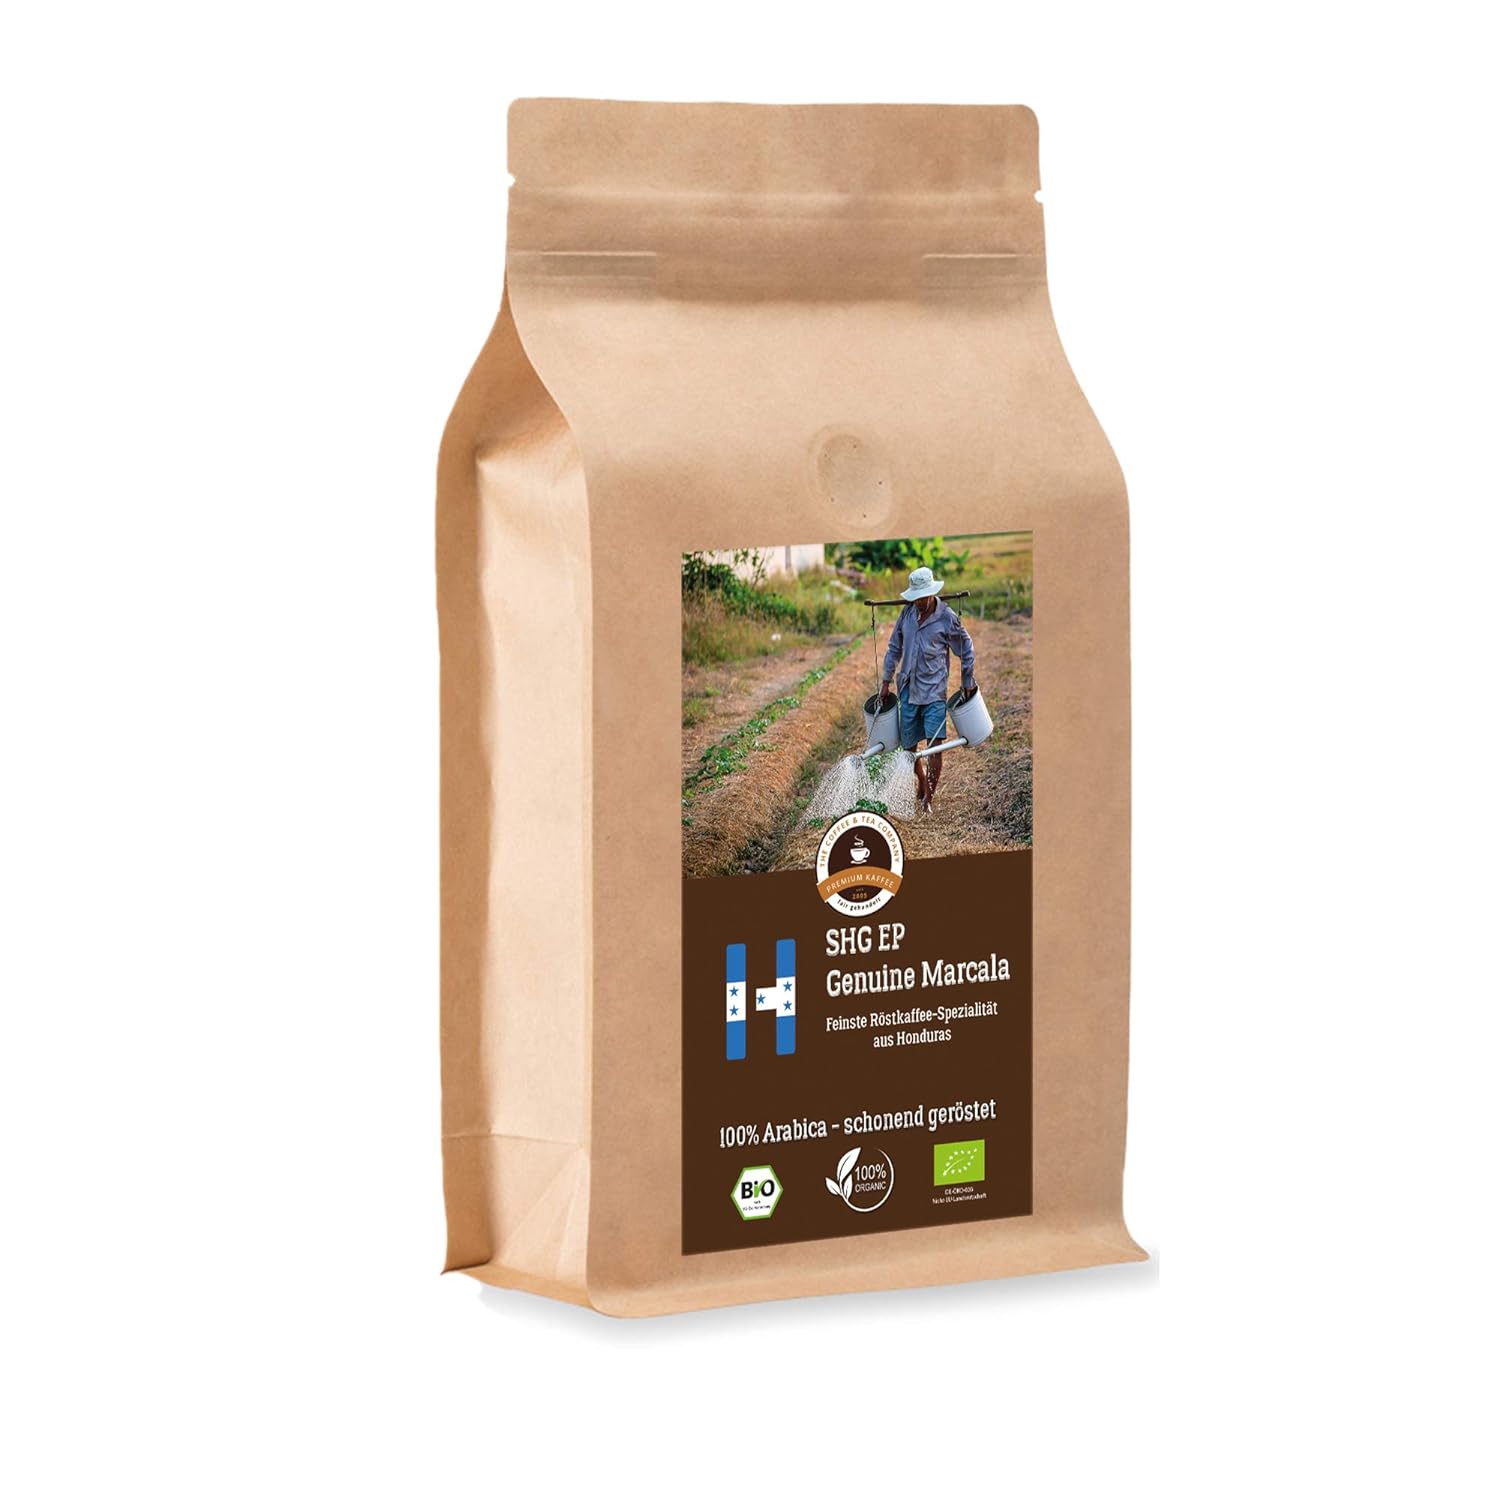 Coffee Globetrotter - Organic Honduras Genuine Marcala - 1000 g Whole Bean - for Fully Automatic Coffee Machine, Coffee Grinder, Hand Mill, - Top Coffee - Roasted Coffee from Organic Cultivation